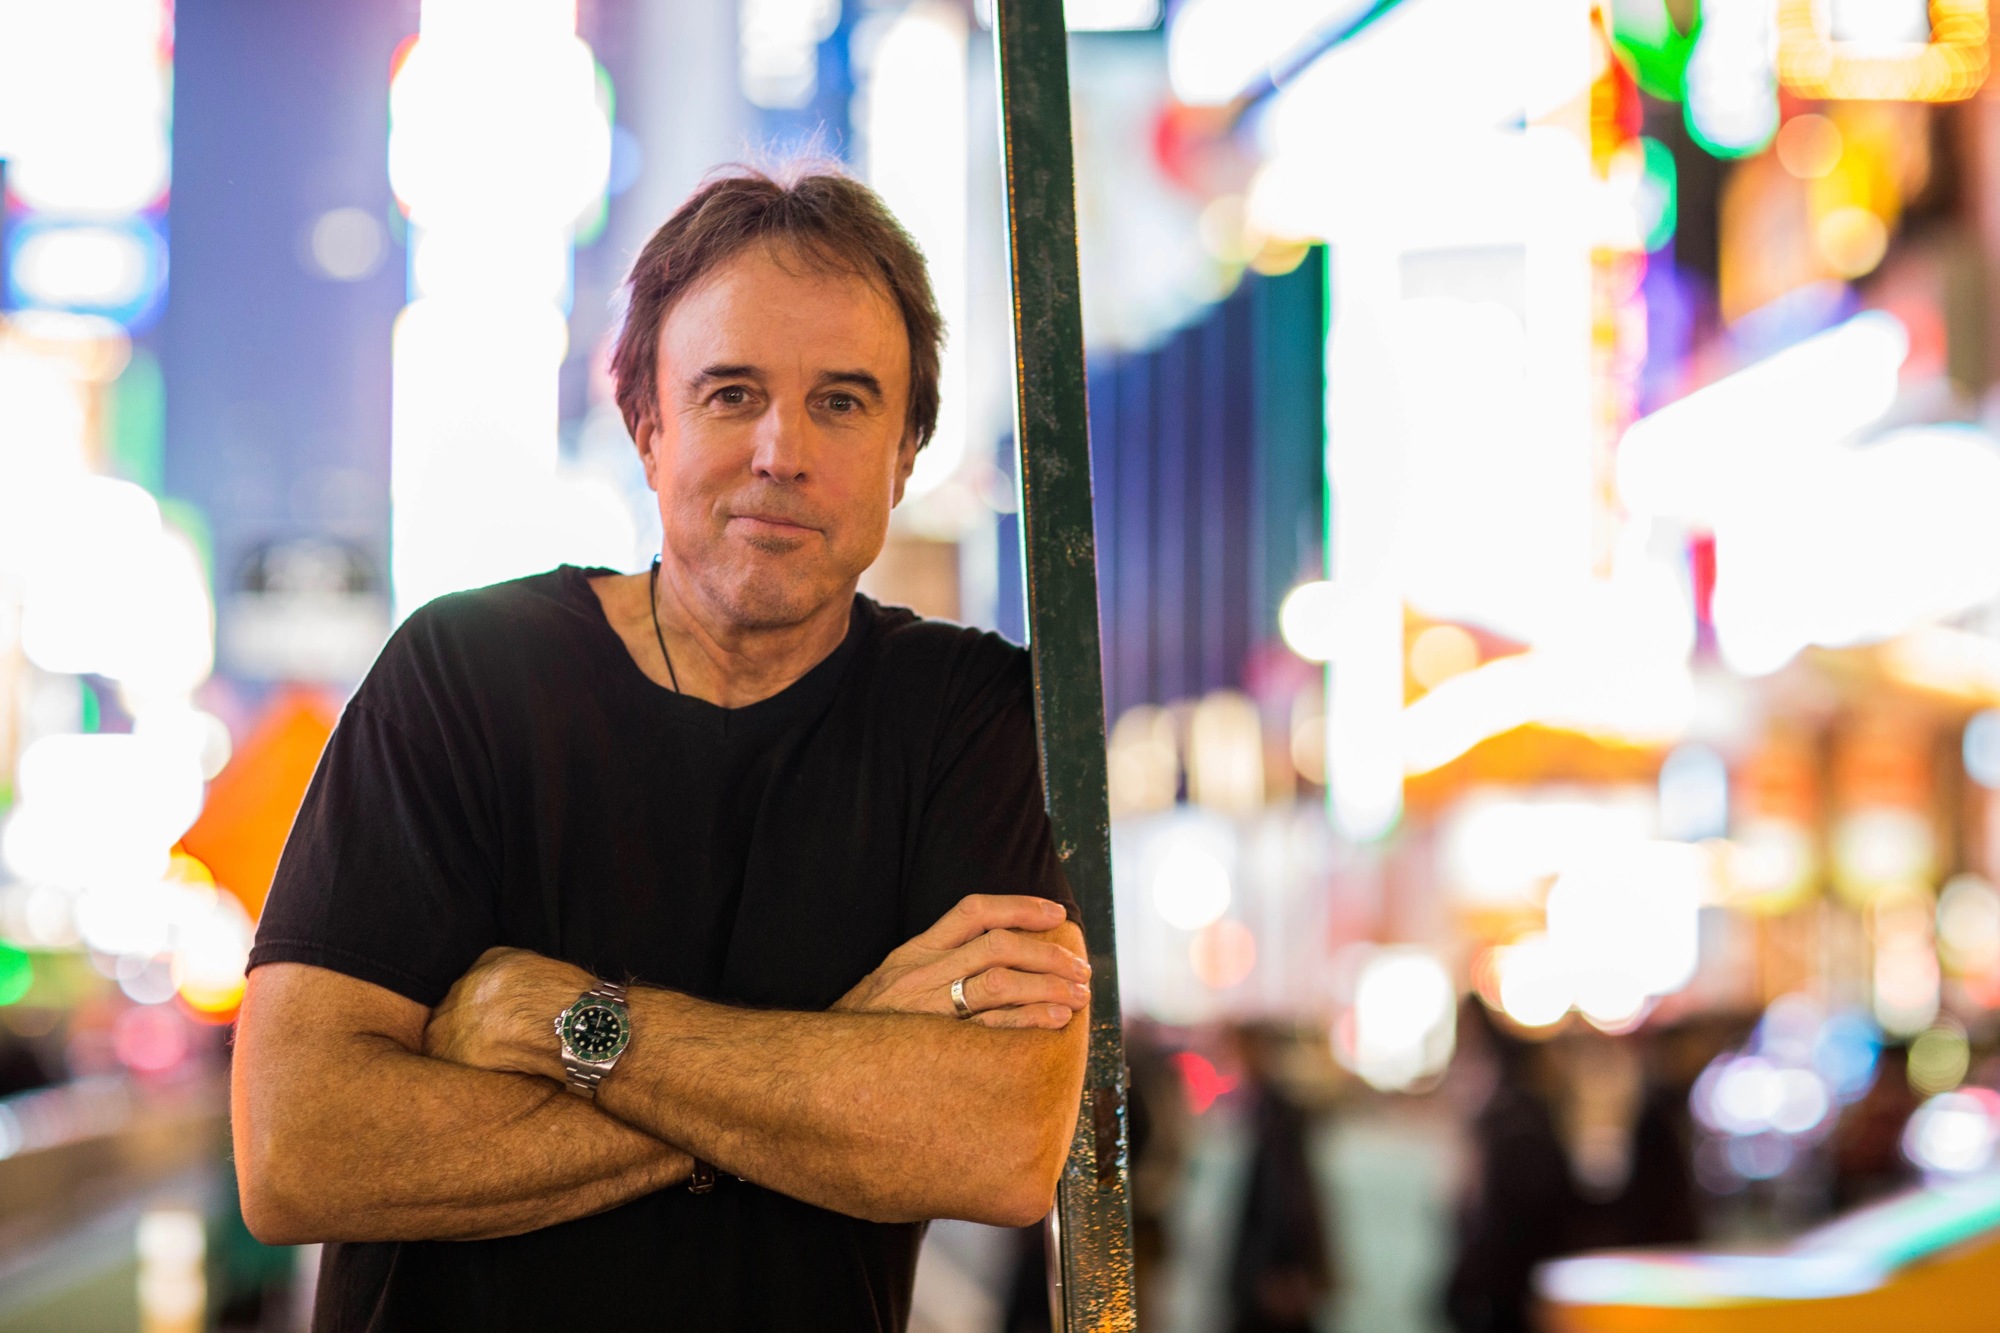 Former SNL cast member Kevin Nealon brings his quick wit to McCurdy's Comedy Theatre.